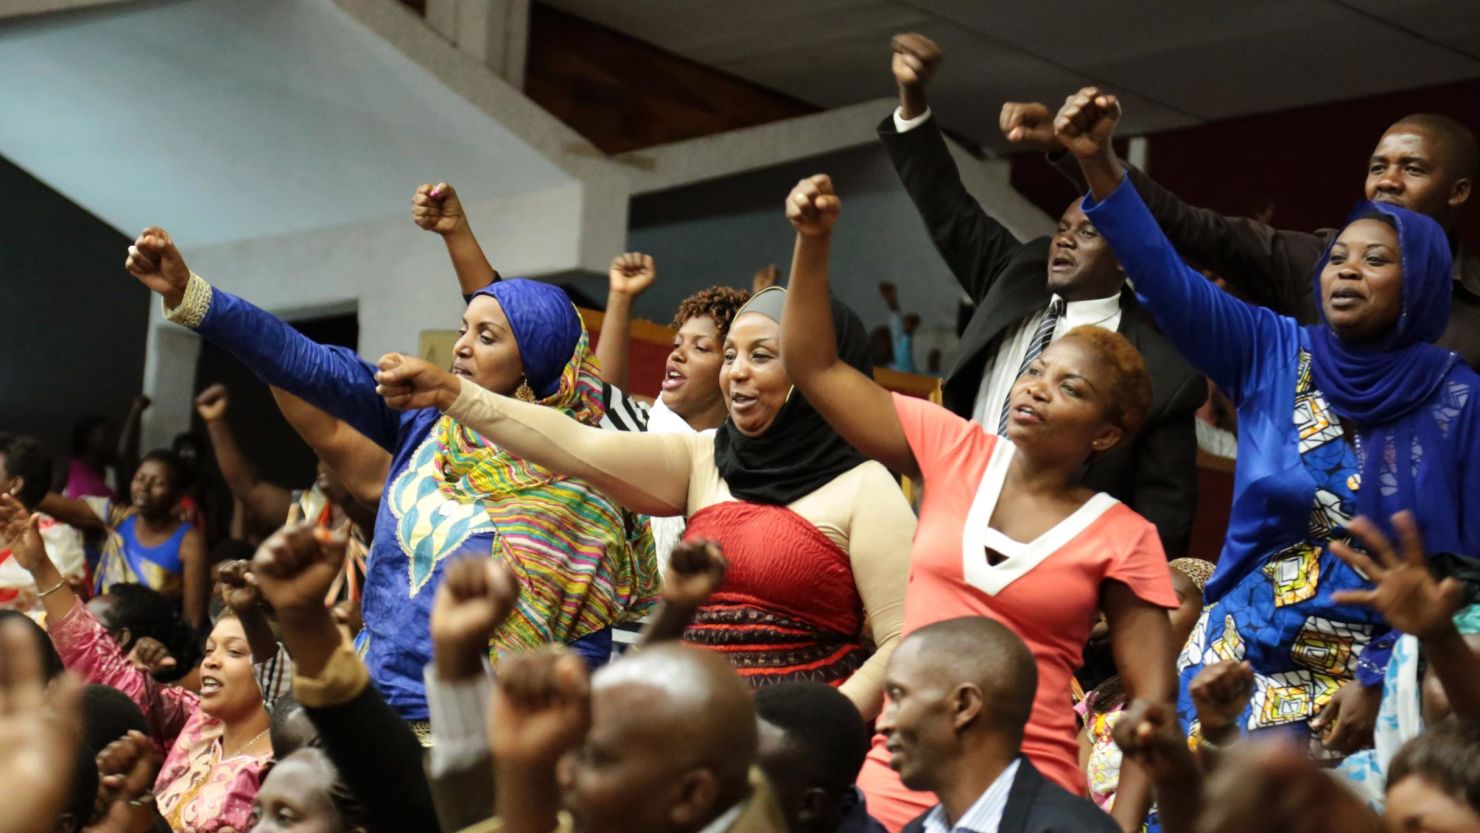 Rwandan people react during the Constitution amendment debate at the parliament in Kigali in 2015 that allowed Paul Kagame a third term in power as president. Rwanda has the highest percentage of women (61%) in its parliament in the world. 